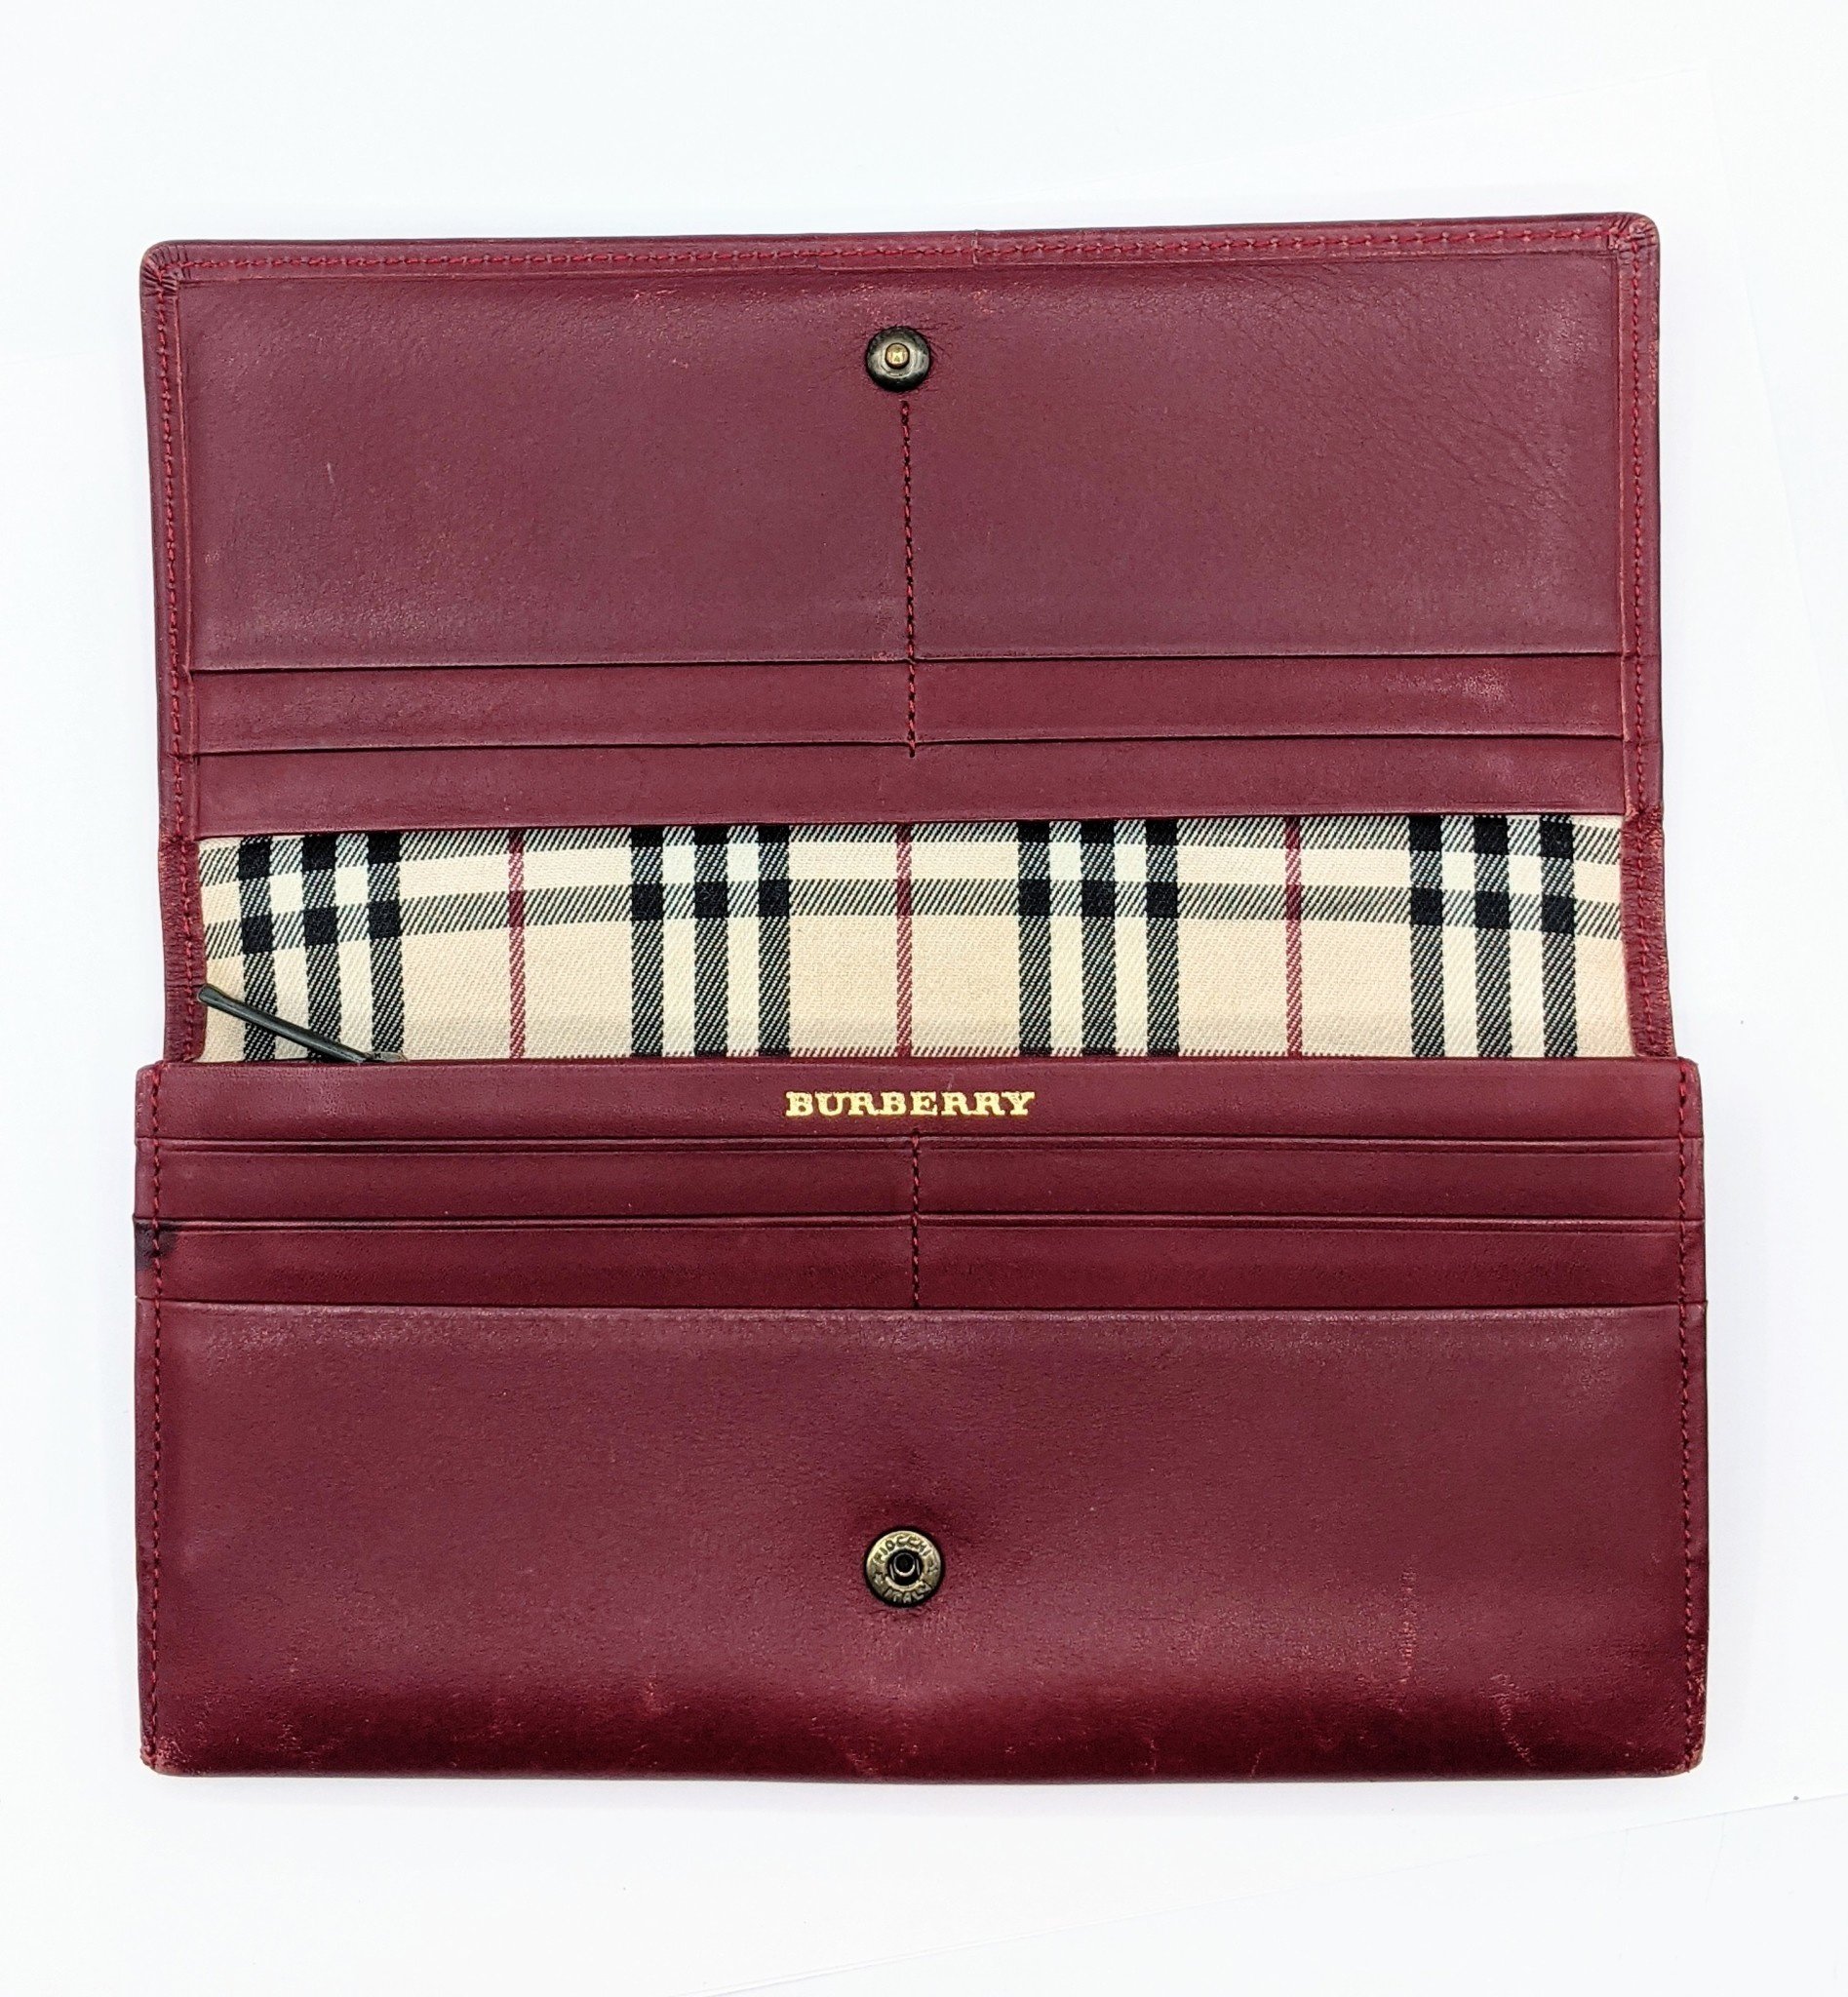 Burberry red leather wallet women NEW